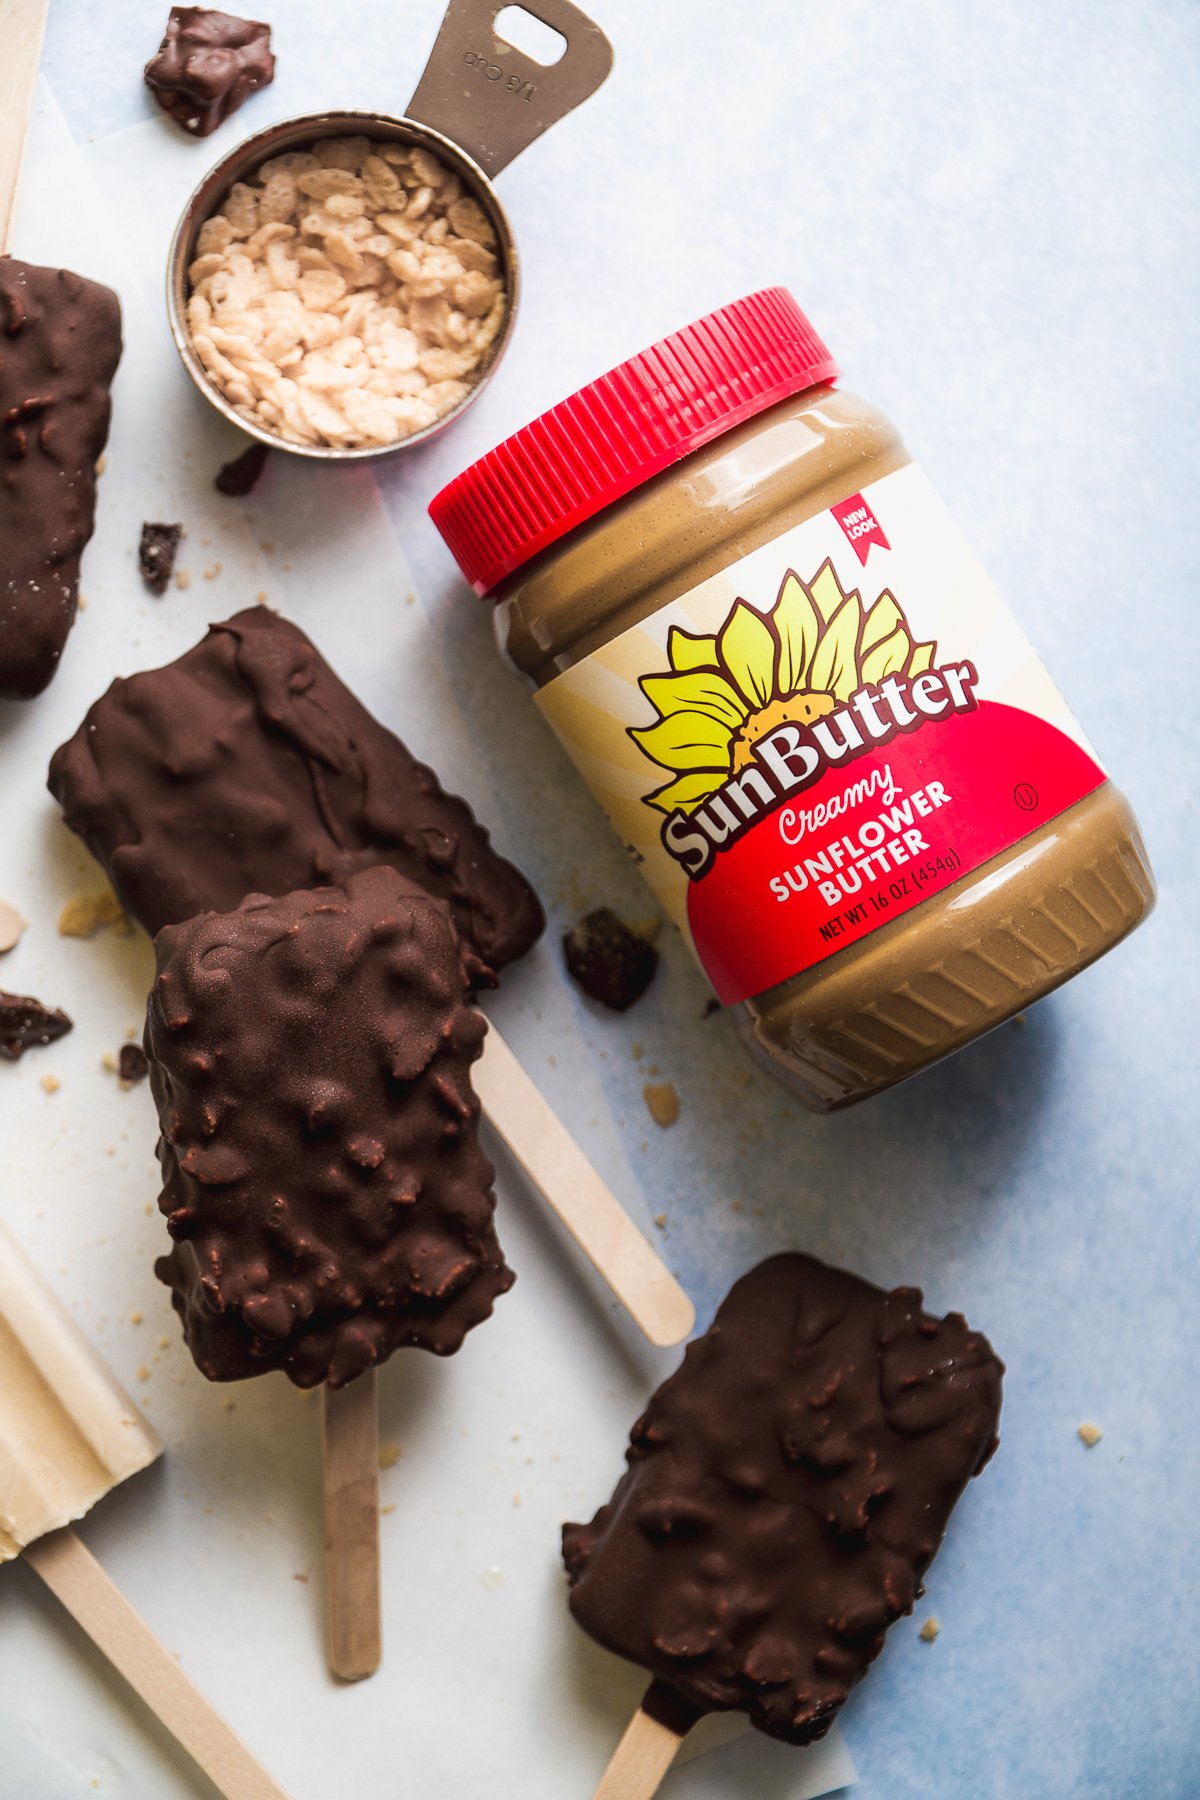 Chocolate frozen yogurt bars spread out on parchment paper with a jar of SunButter next to it.